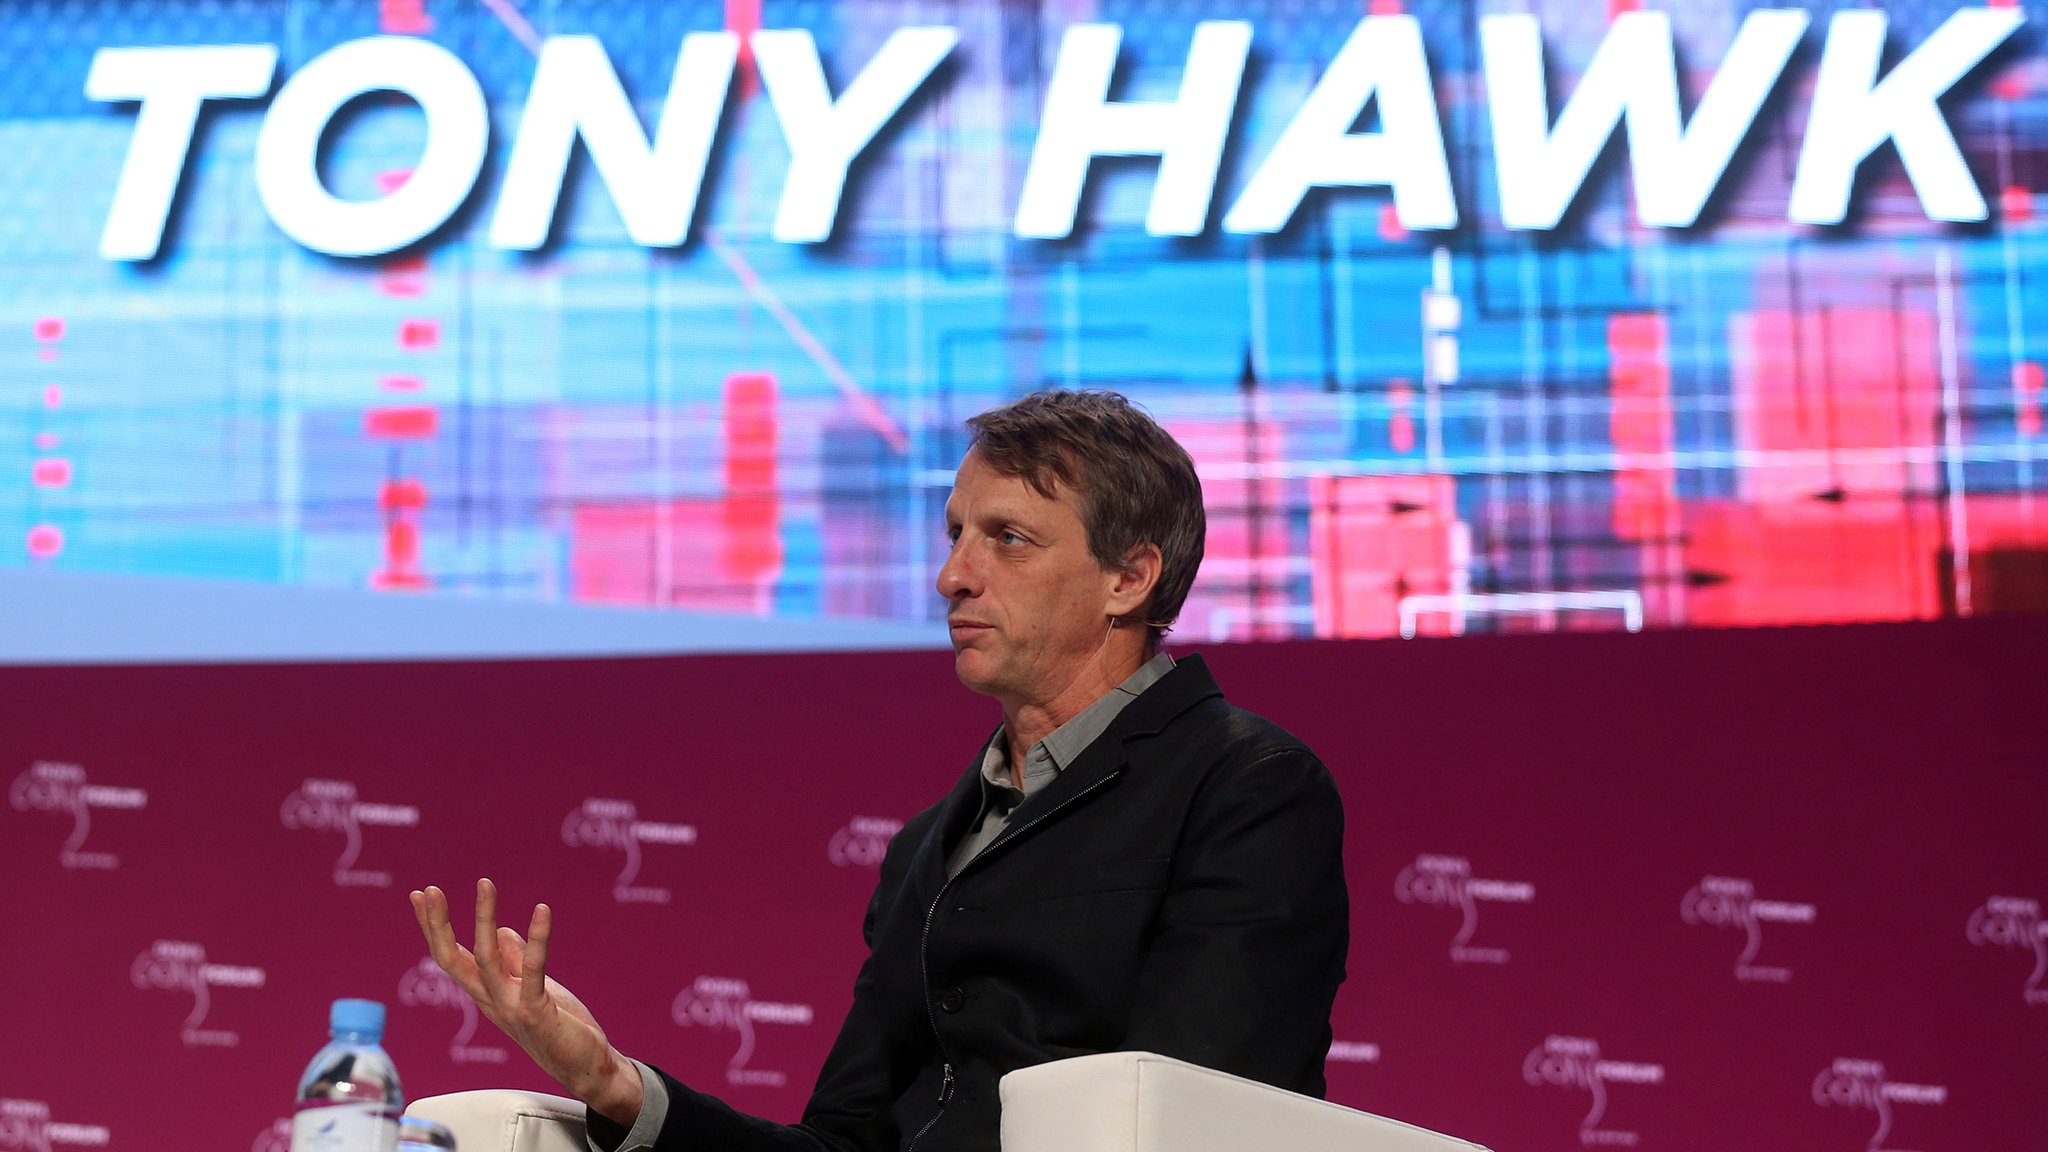 Last week, Tony Hawk told Larry King he has been involved in recent talks with the IOC and that skateboarding is very likely to be in the 2020 Games.